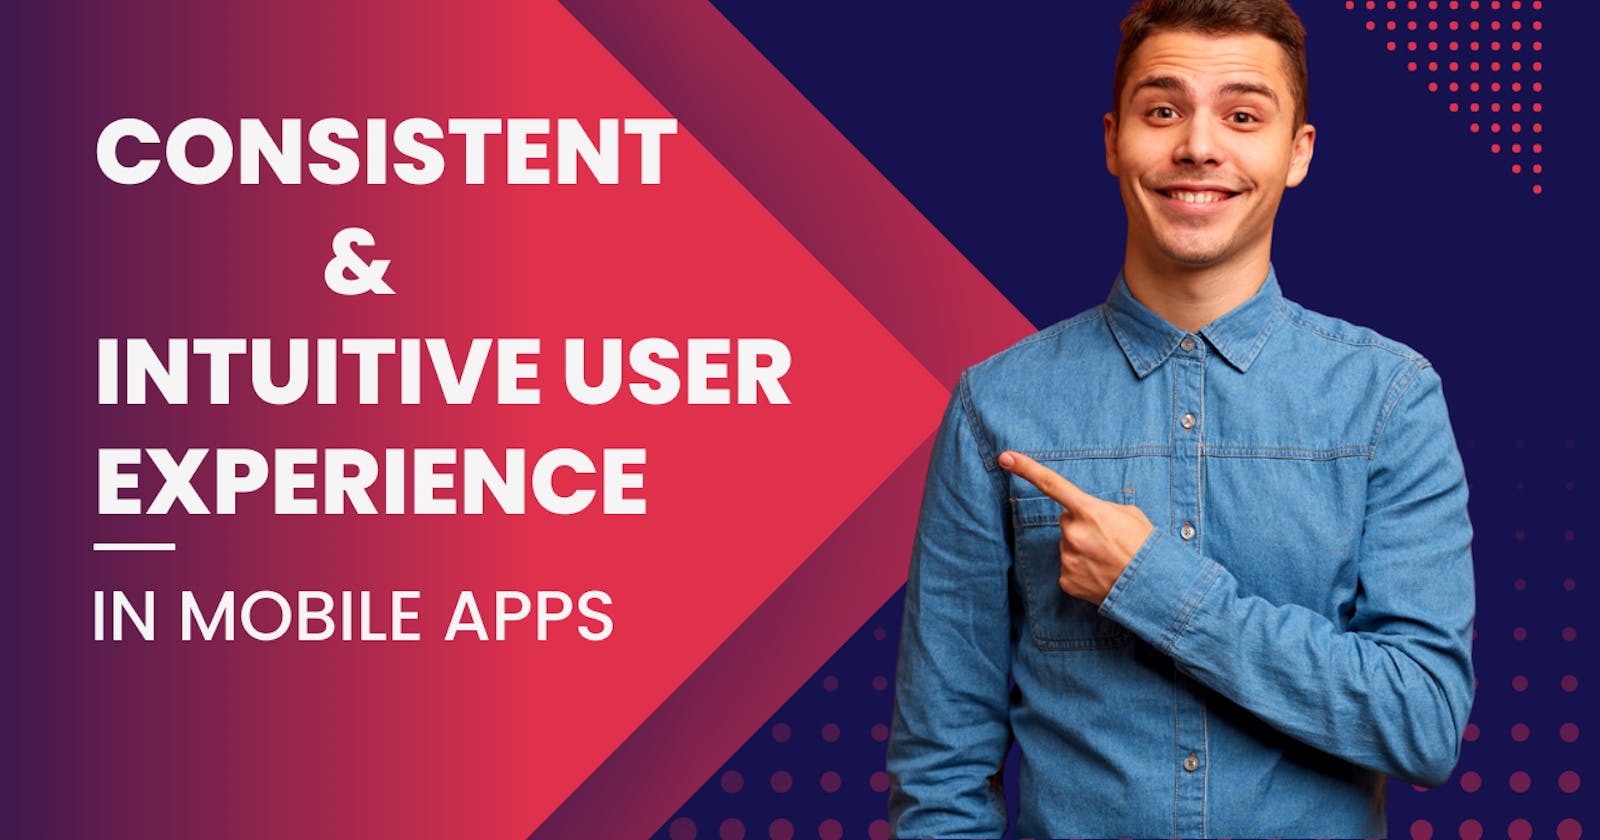 How to Create a Consistent and Intuitive User Experience in Mobile Apps